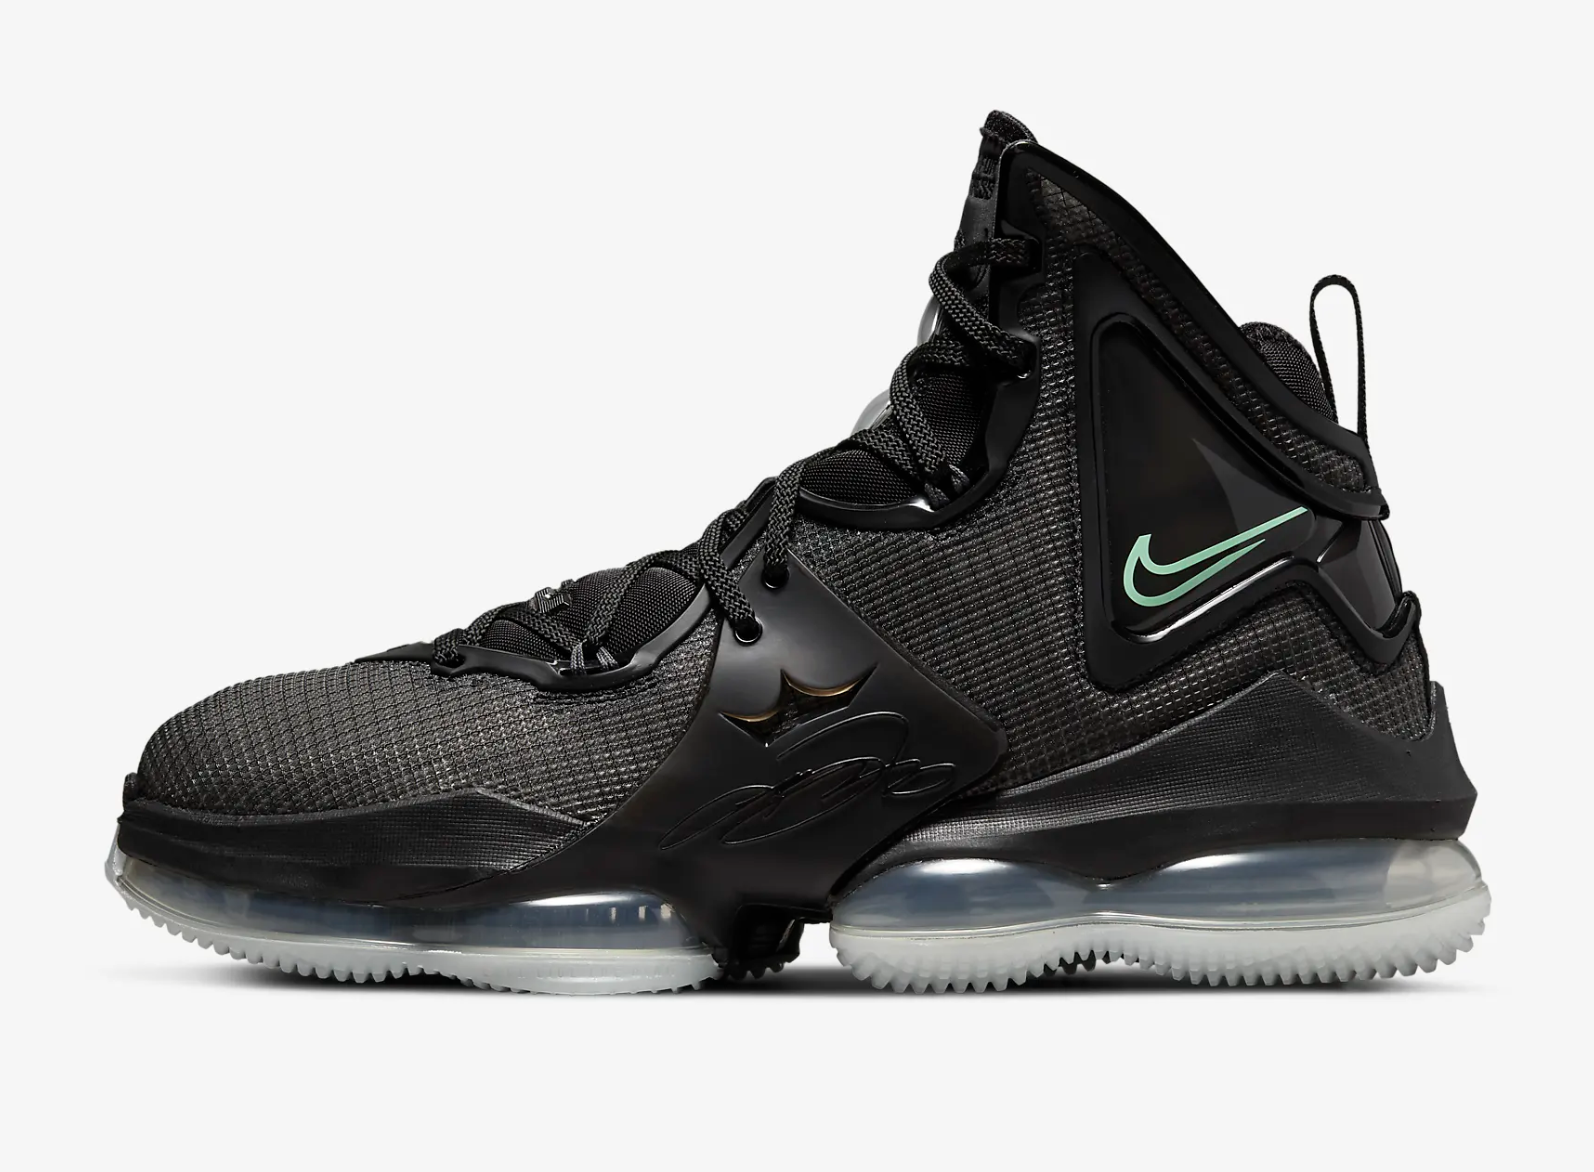 Best Nike Lebron 19 Colorways, From 